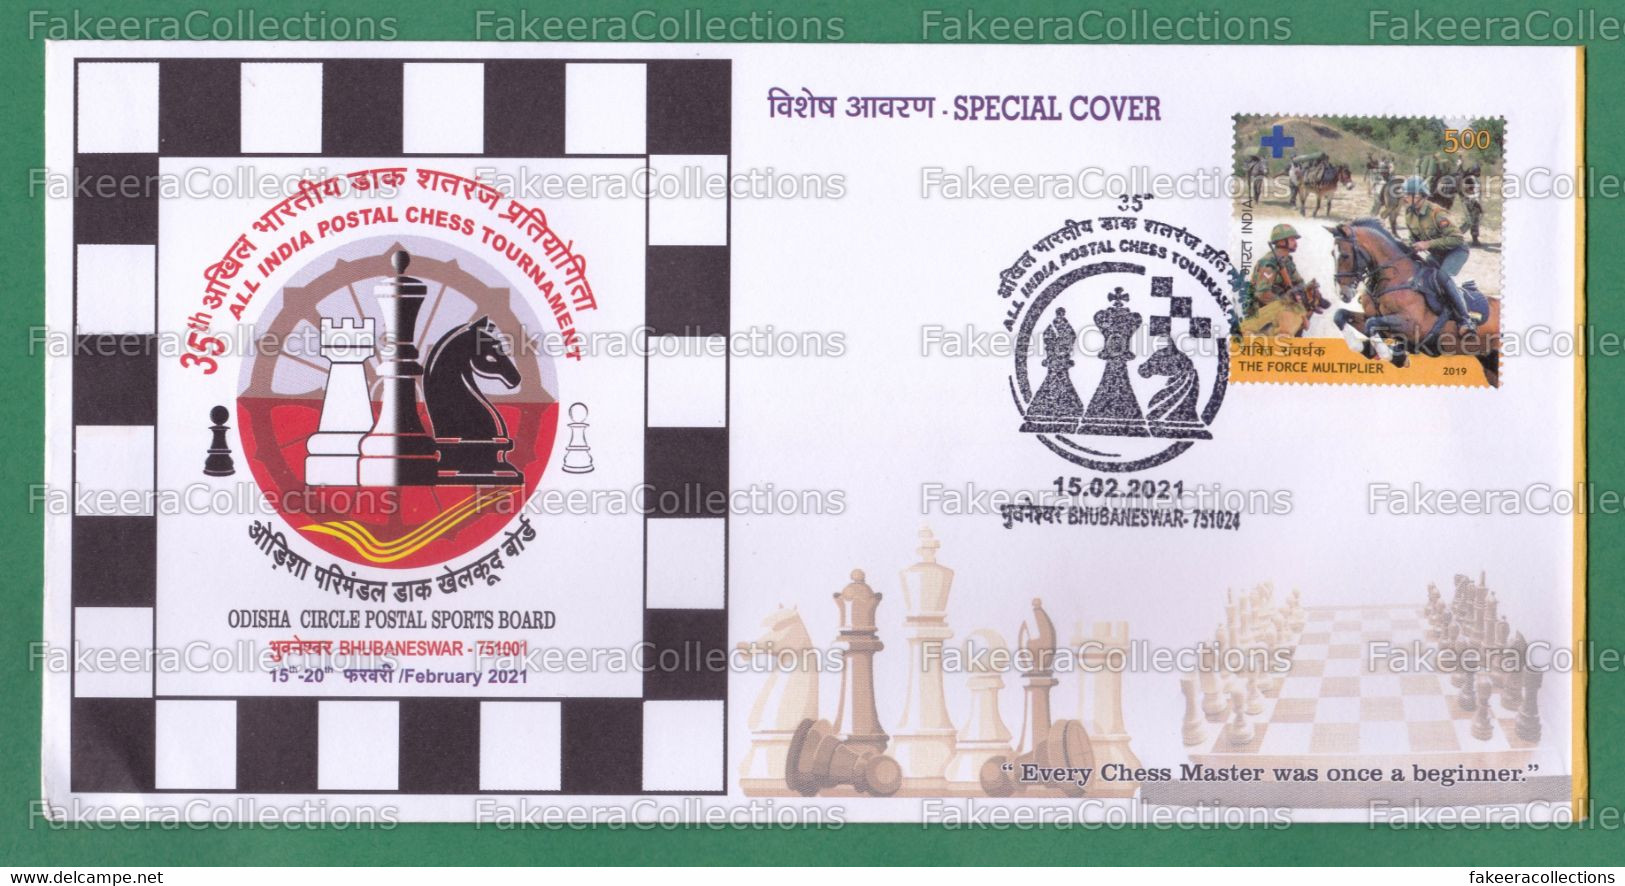 INDIA 2021 Inde Indien - 35th POSTAL CHESS TOURNAMENT - SPECIAL COVER - Bhubaneshar 15.02.2021 - Games, Sports, Game - Ajedrez